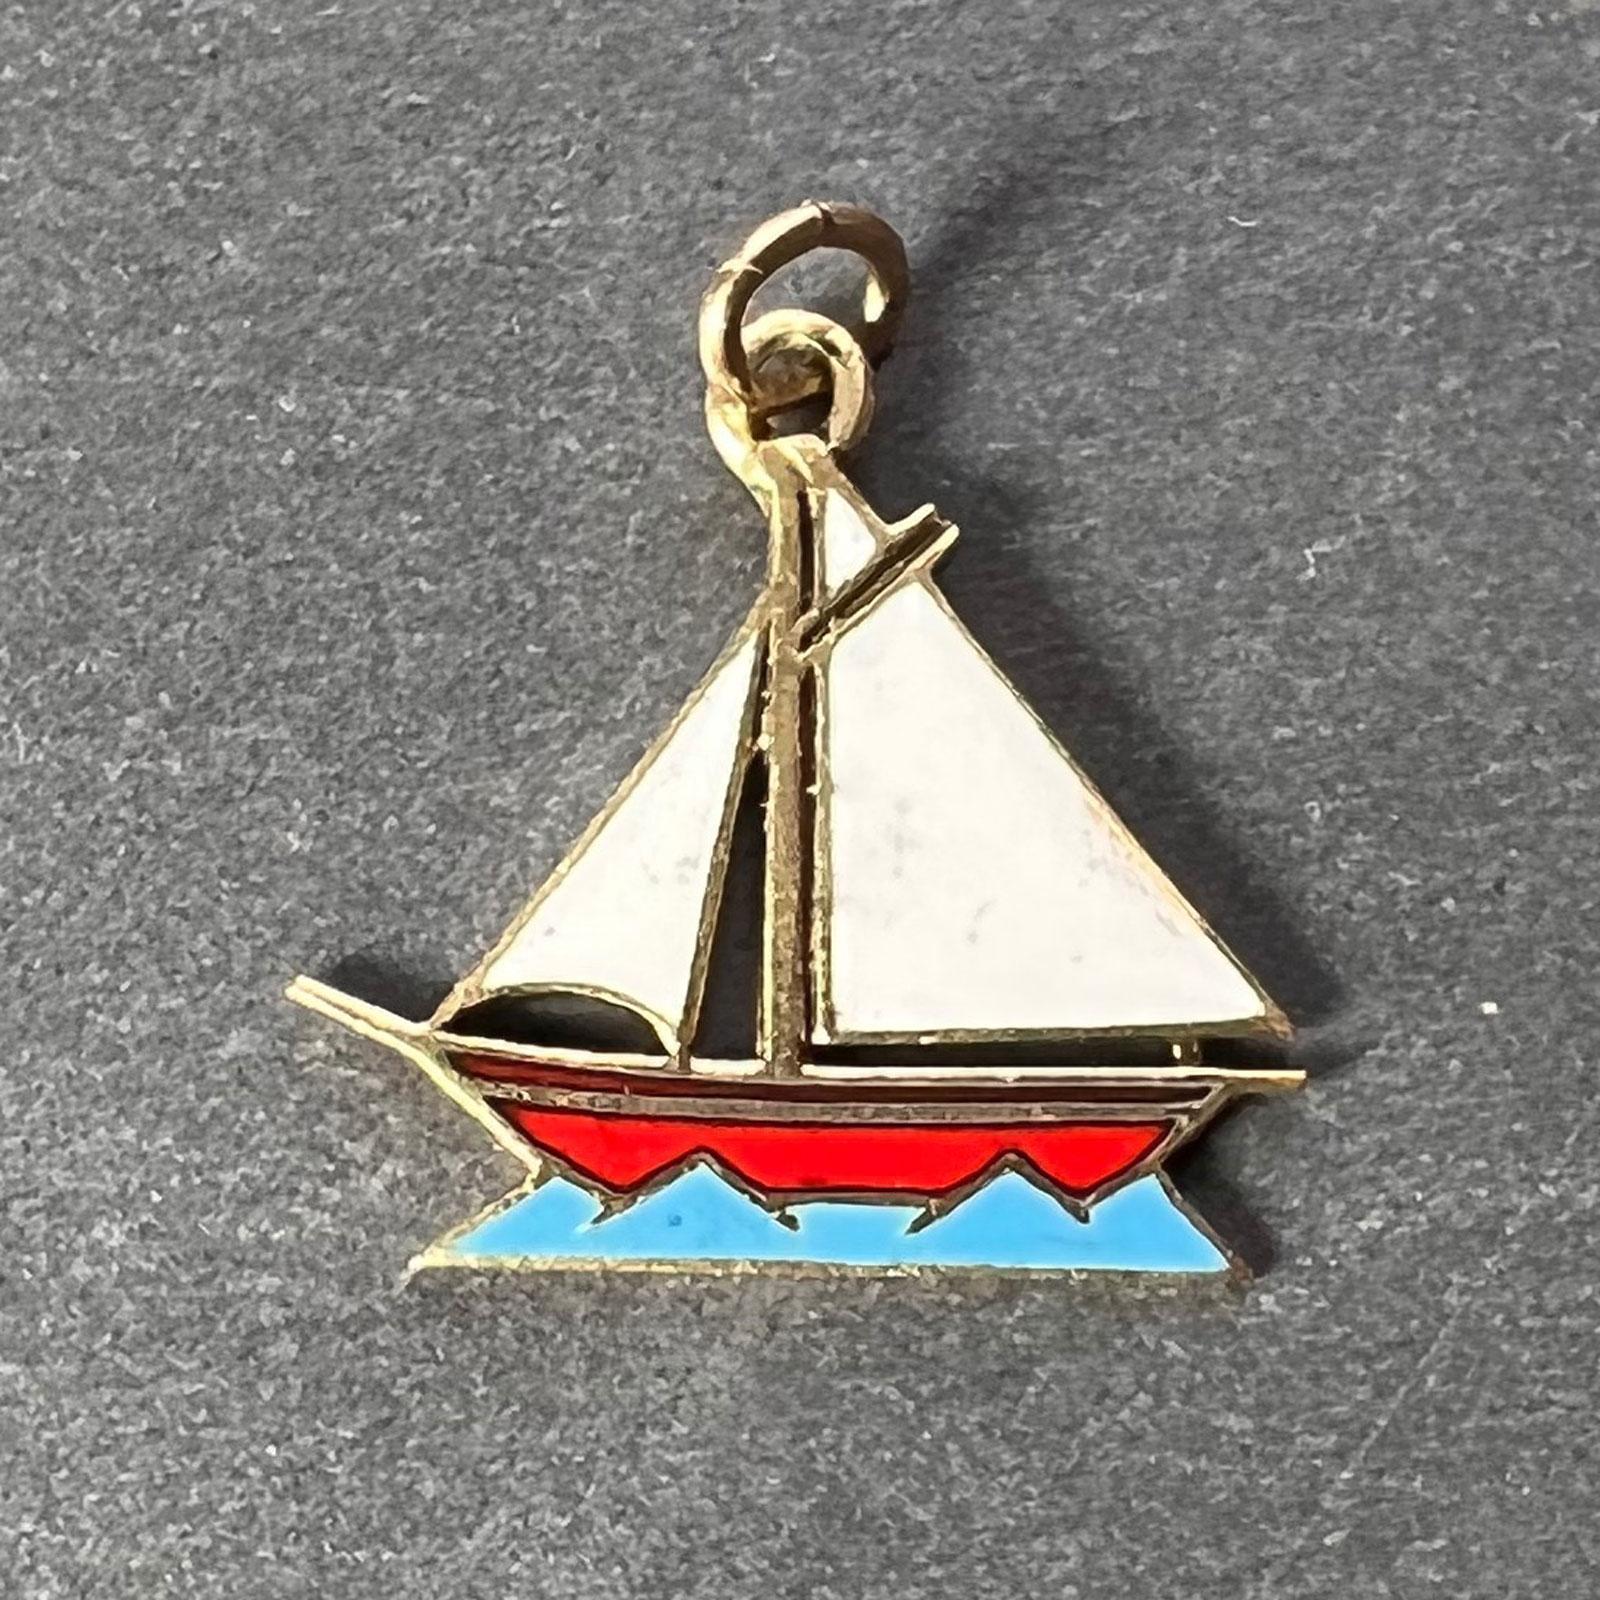 A 14 karat (14K) yellow gold charm pendant designed as a sailing yacht with white enamel sails, red enamel hull and blue enamel sea. Unmarked but tested for 14 karat gold.

Dimensions: 1.5 x 1.6 x 0.1 cm (not including jump ring)
Weight: 0.90 grams 
